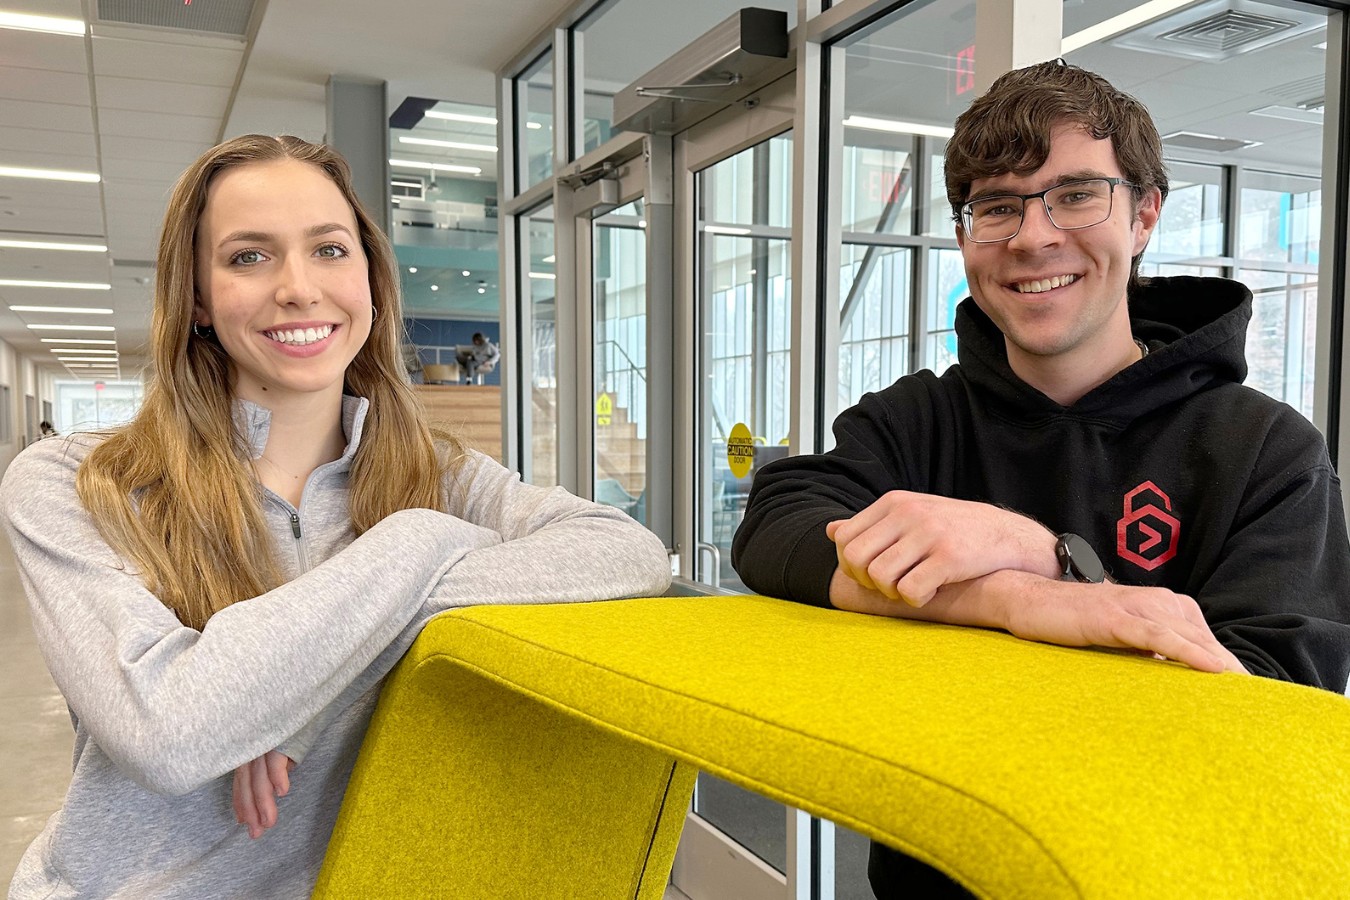 Angela Slattery, a junior Computer Science major from Franksville, Wis., and Tristan Stapert, a senior Cyber Operations major from Tumwater, Wash.